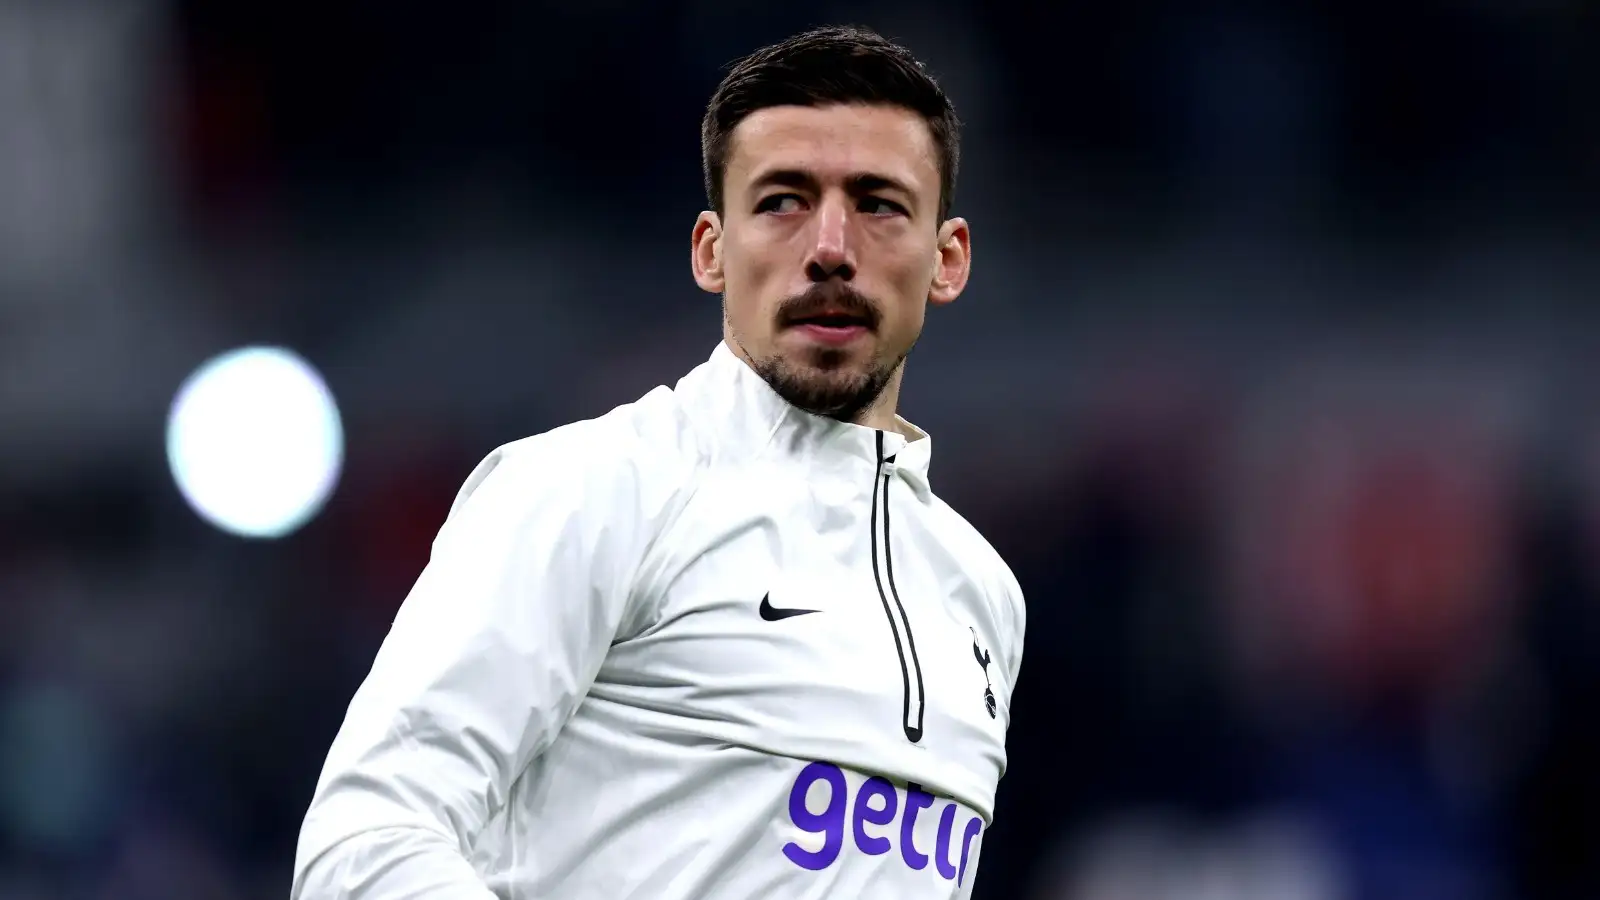 Tottenham boss hints Barcelona loanee Clement Lenglet will stay at Spurs -  Barca Blaugranes